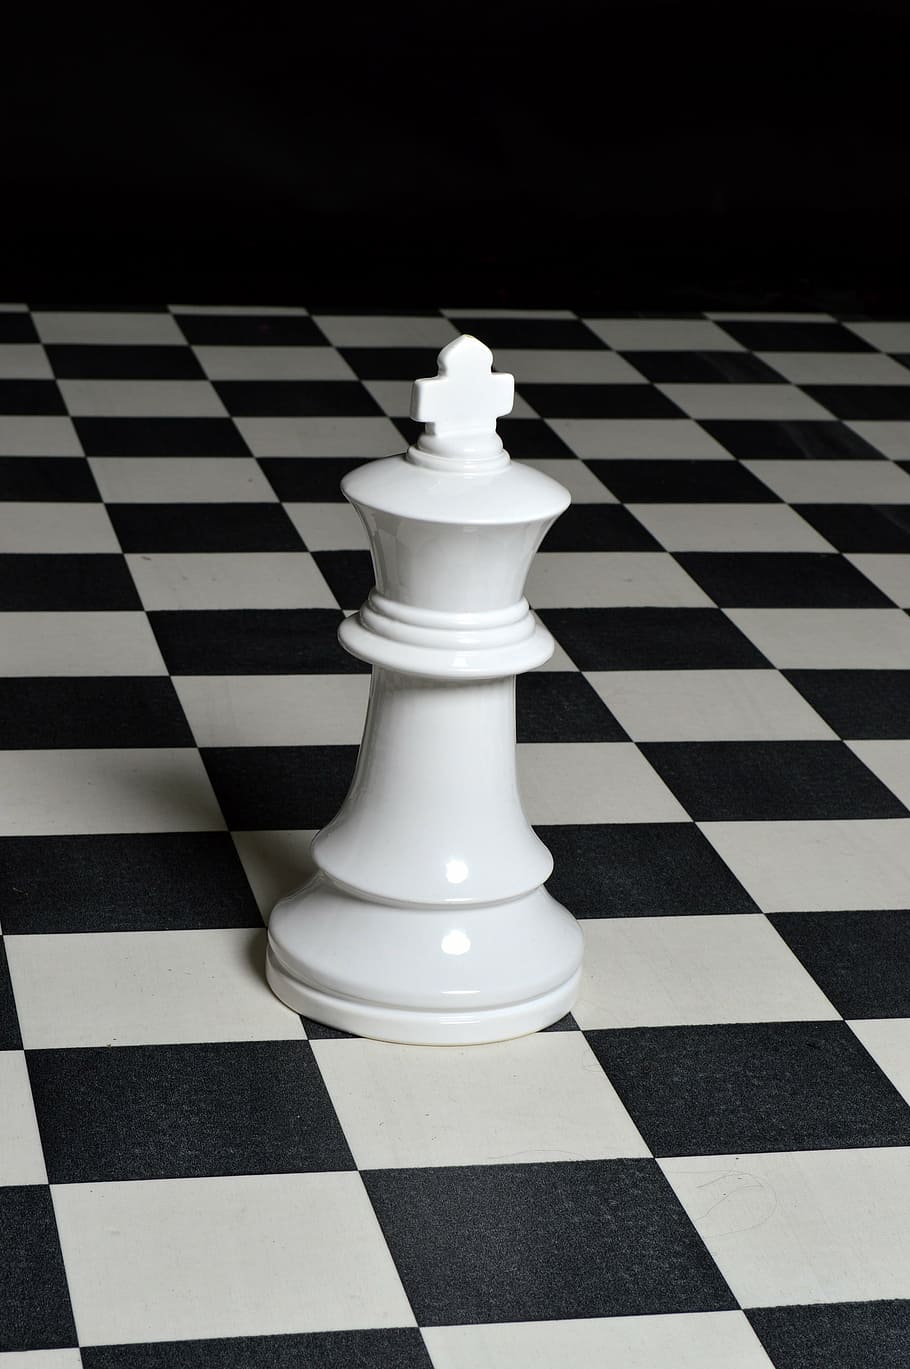 chess piece, chess, strategy, board, king, game, board game, leisure games, checked pattern, white color